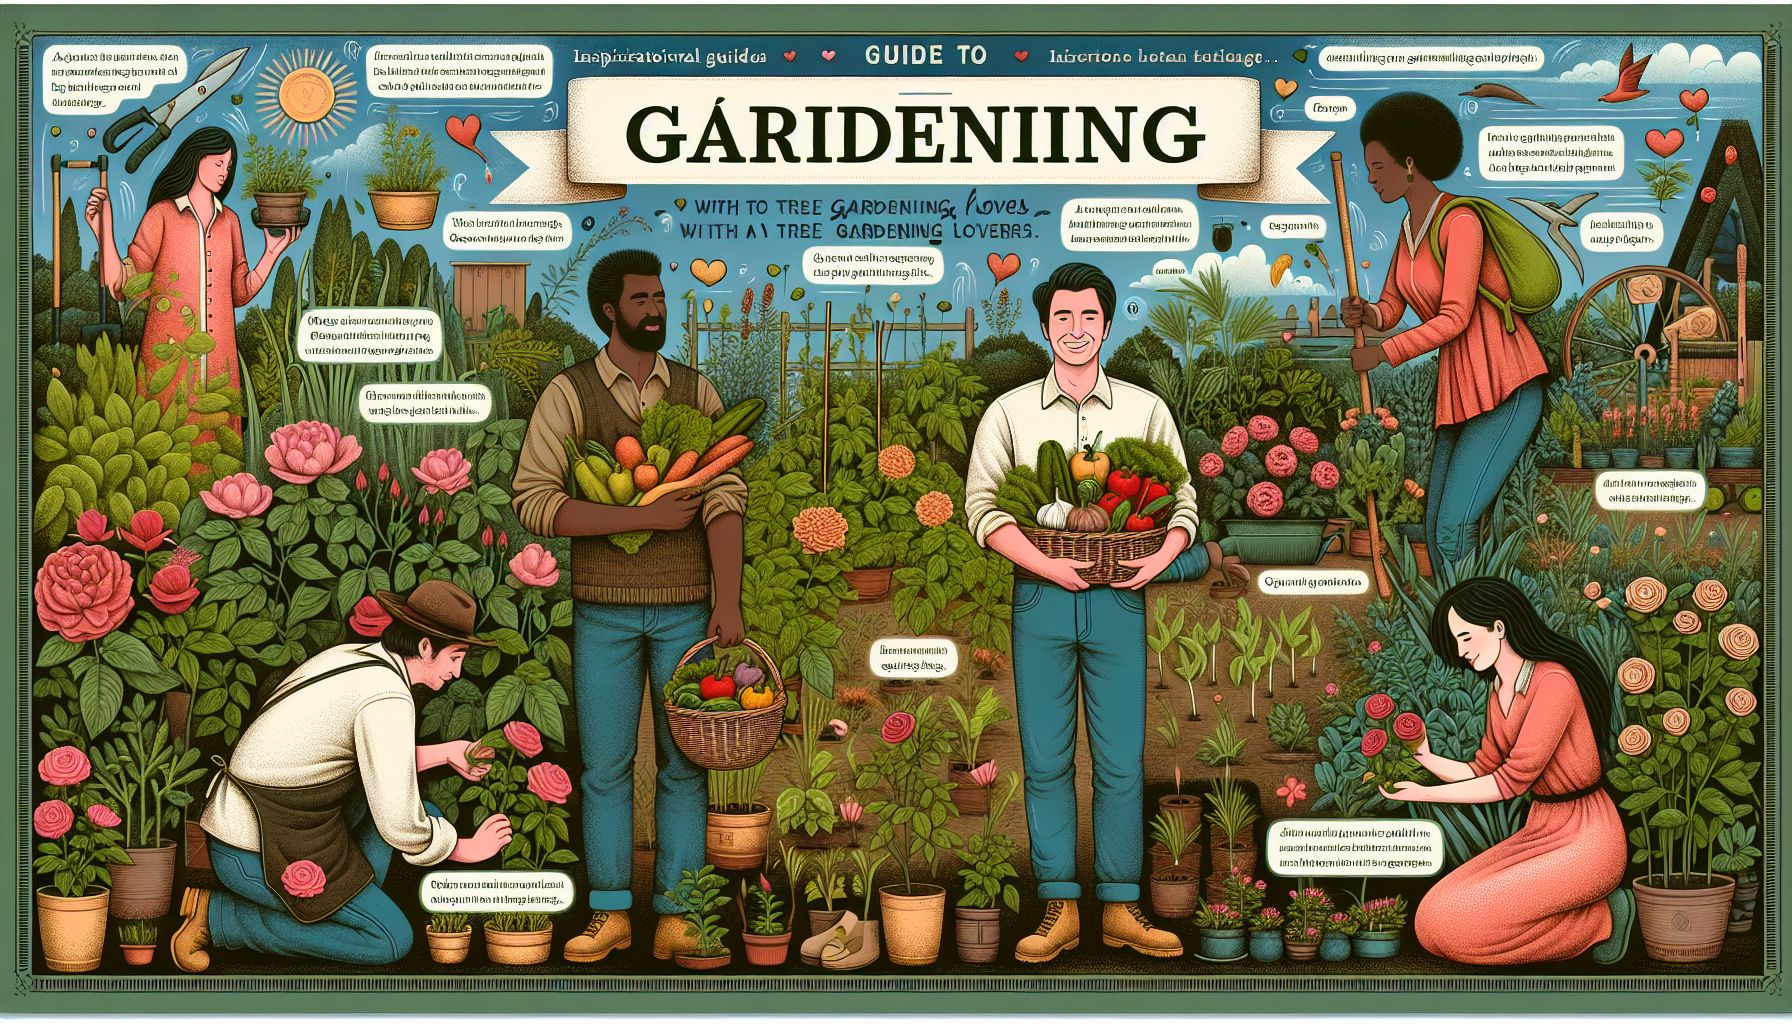 Gardening Tips That Will Inspire Those Who Have a Deep Love for Gardening